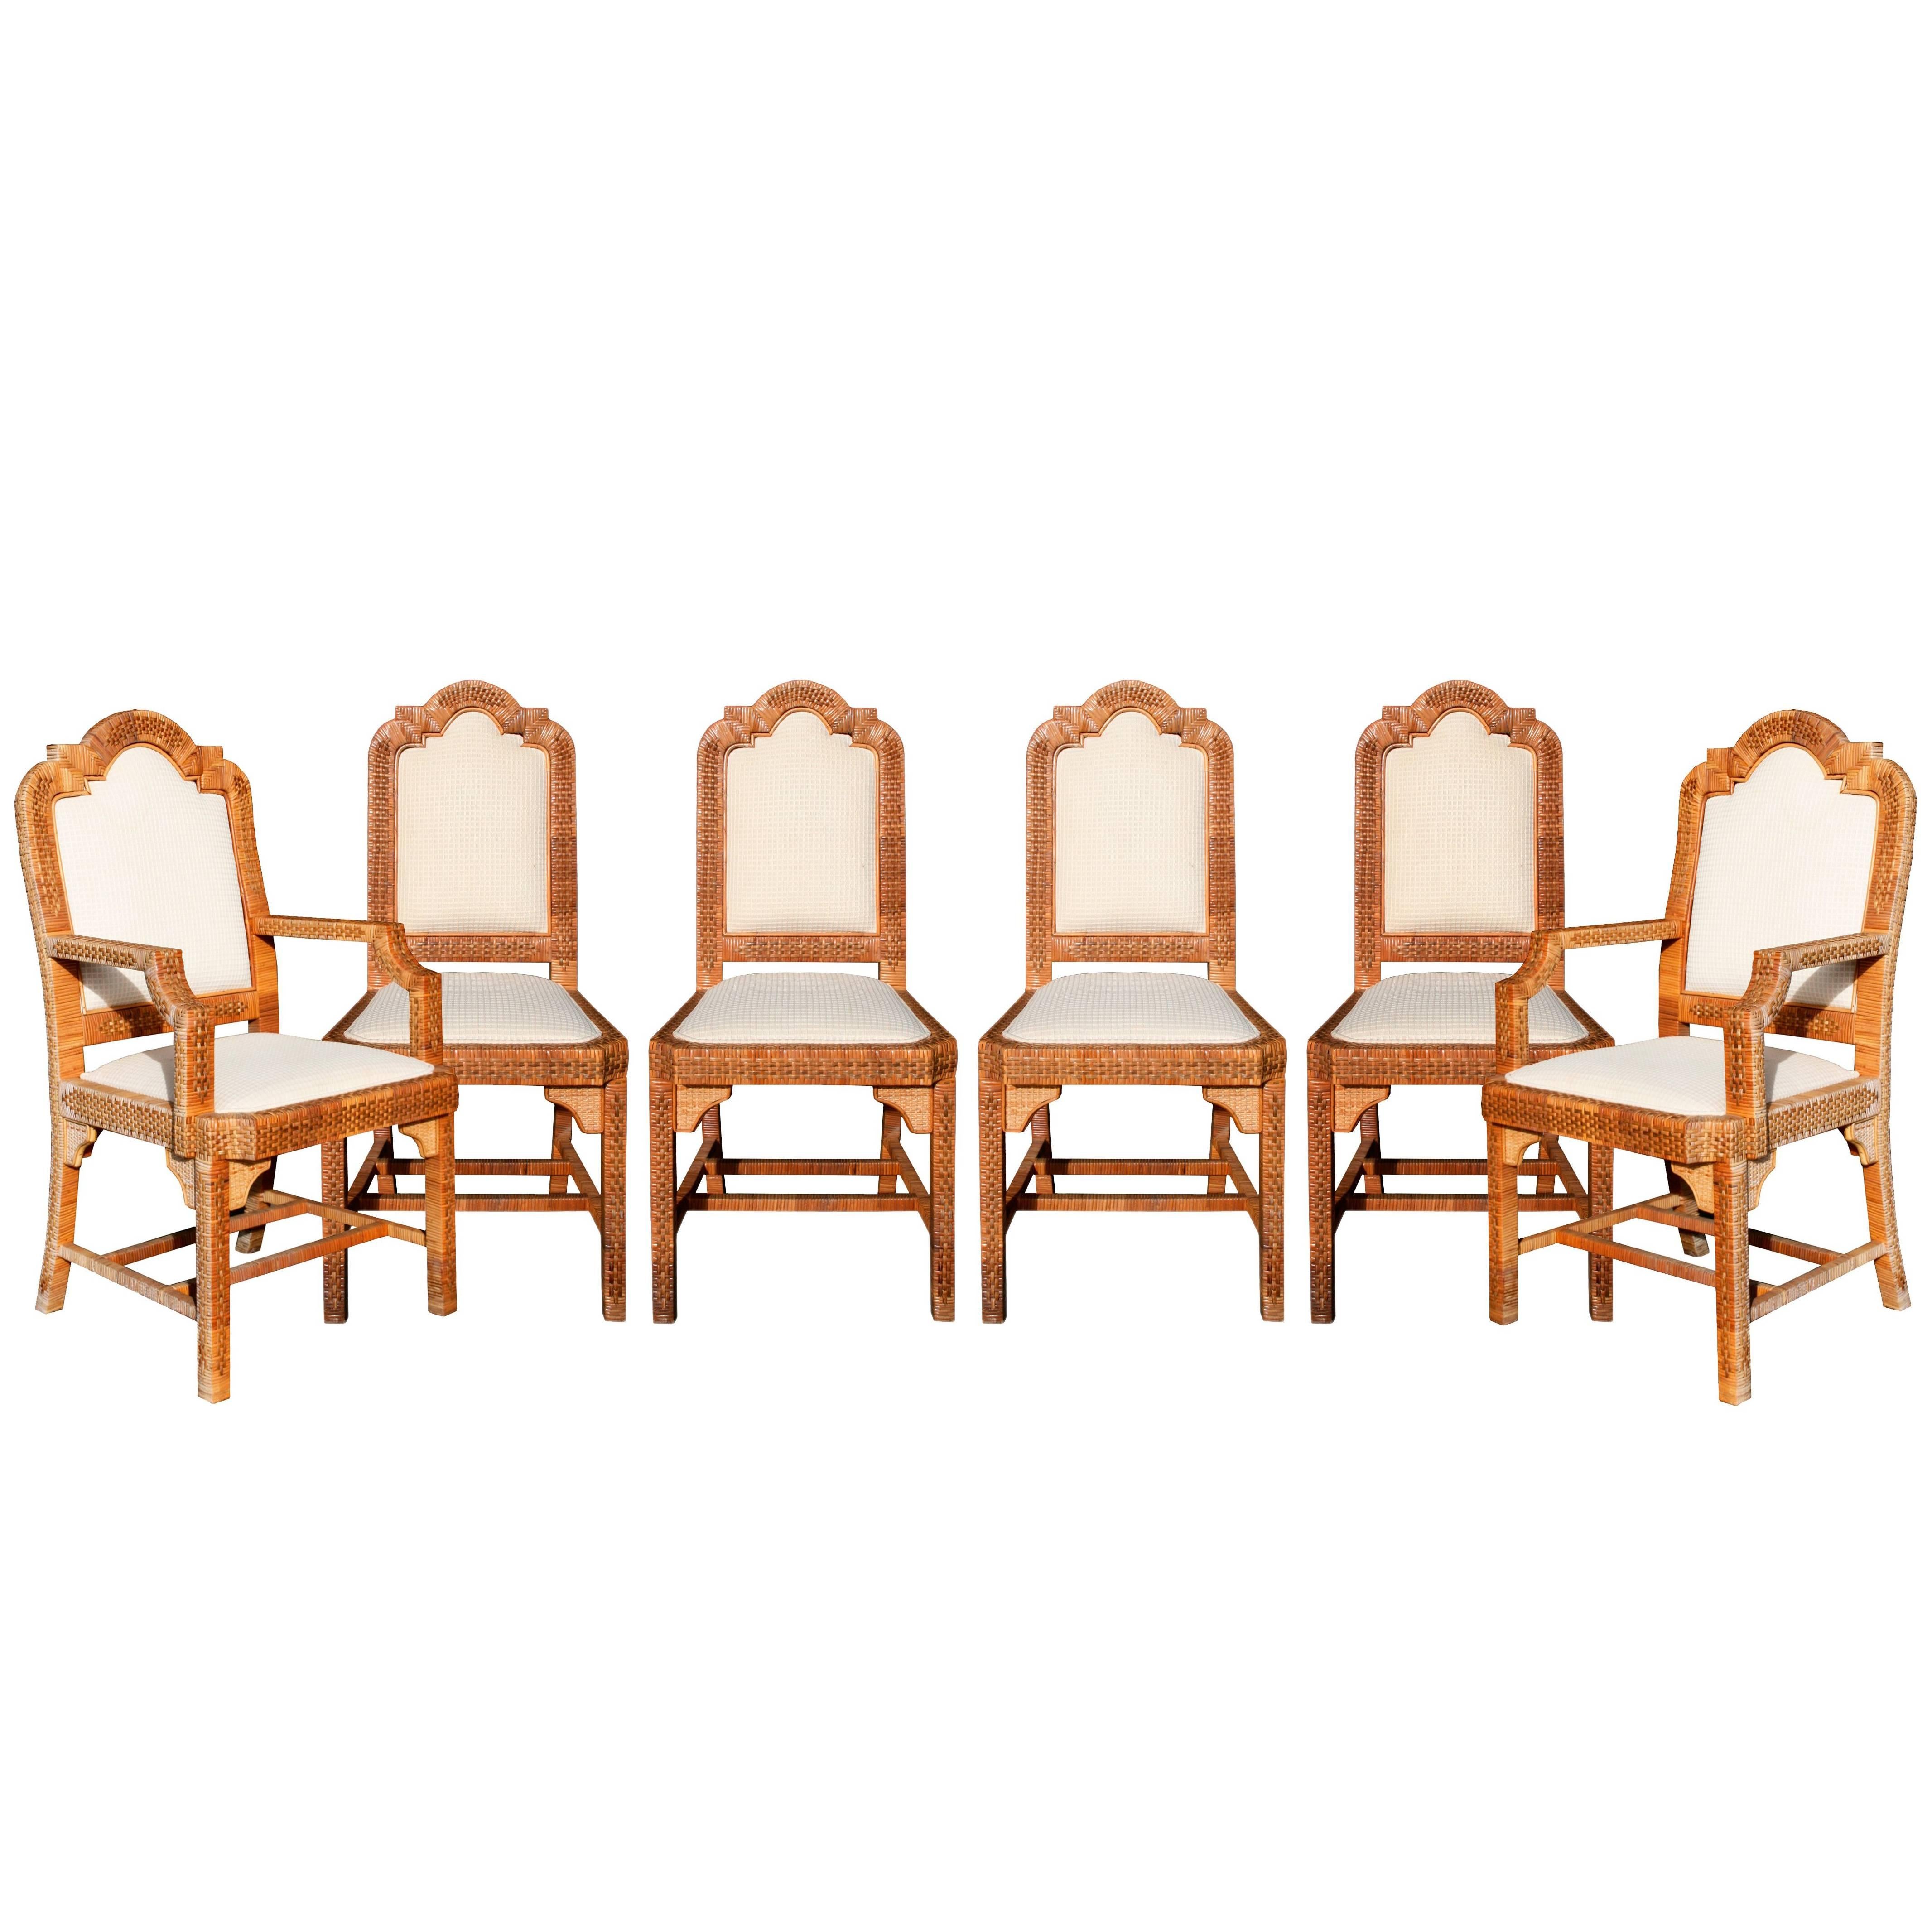 1980s Six-Piece Seating Set, Solid Wood Frames Lined with Interlaced Wicker For Sale